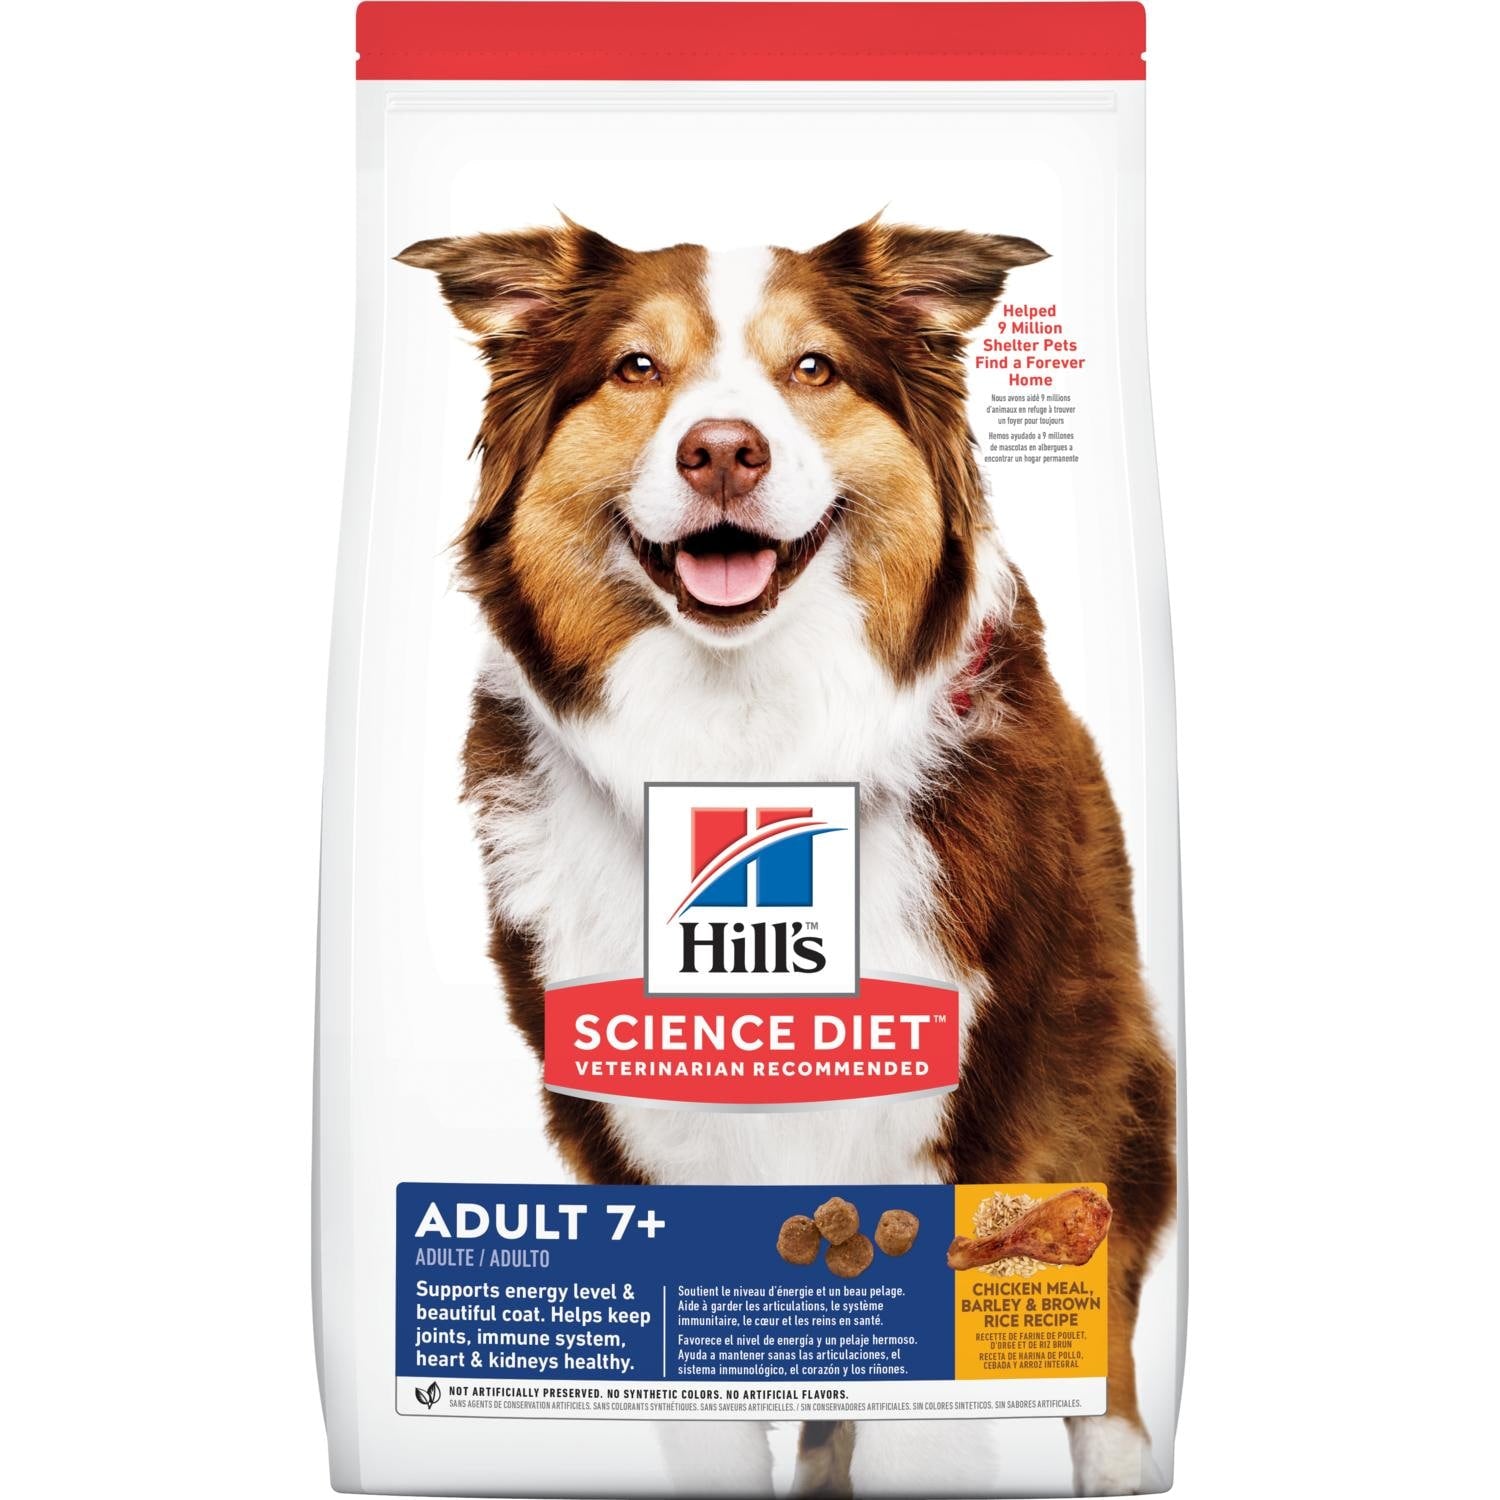 Hill's™ Science Diet™ Adult 7+ Chicken Meal, Barley & Rice Recipe dog food 33 lb